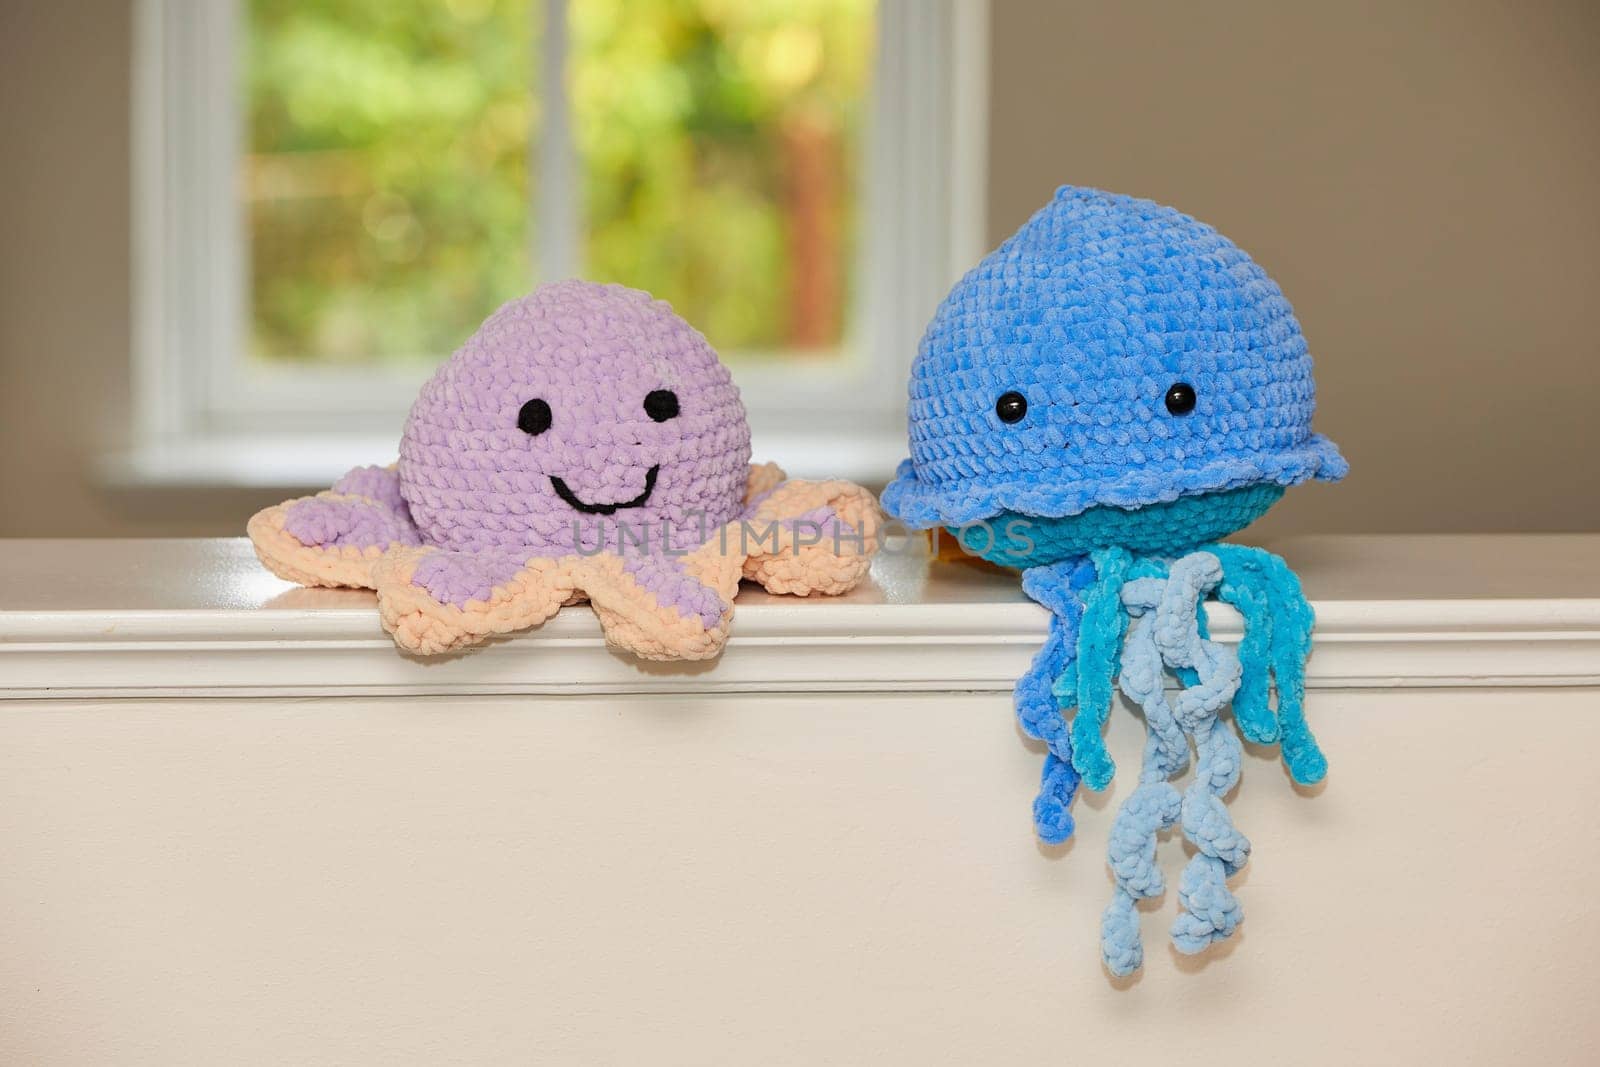 Cute knitted toy octopus and jellyfish at home.